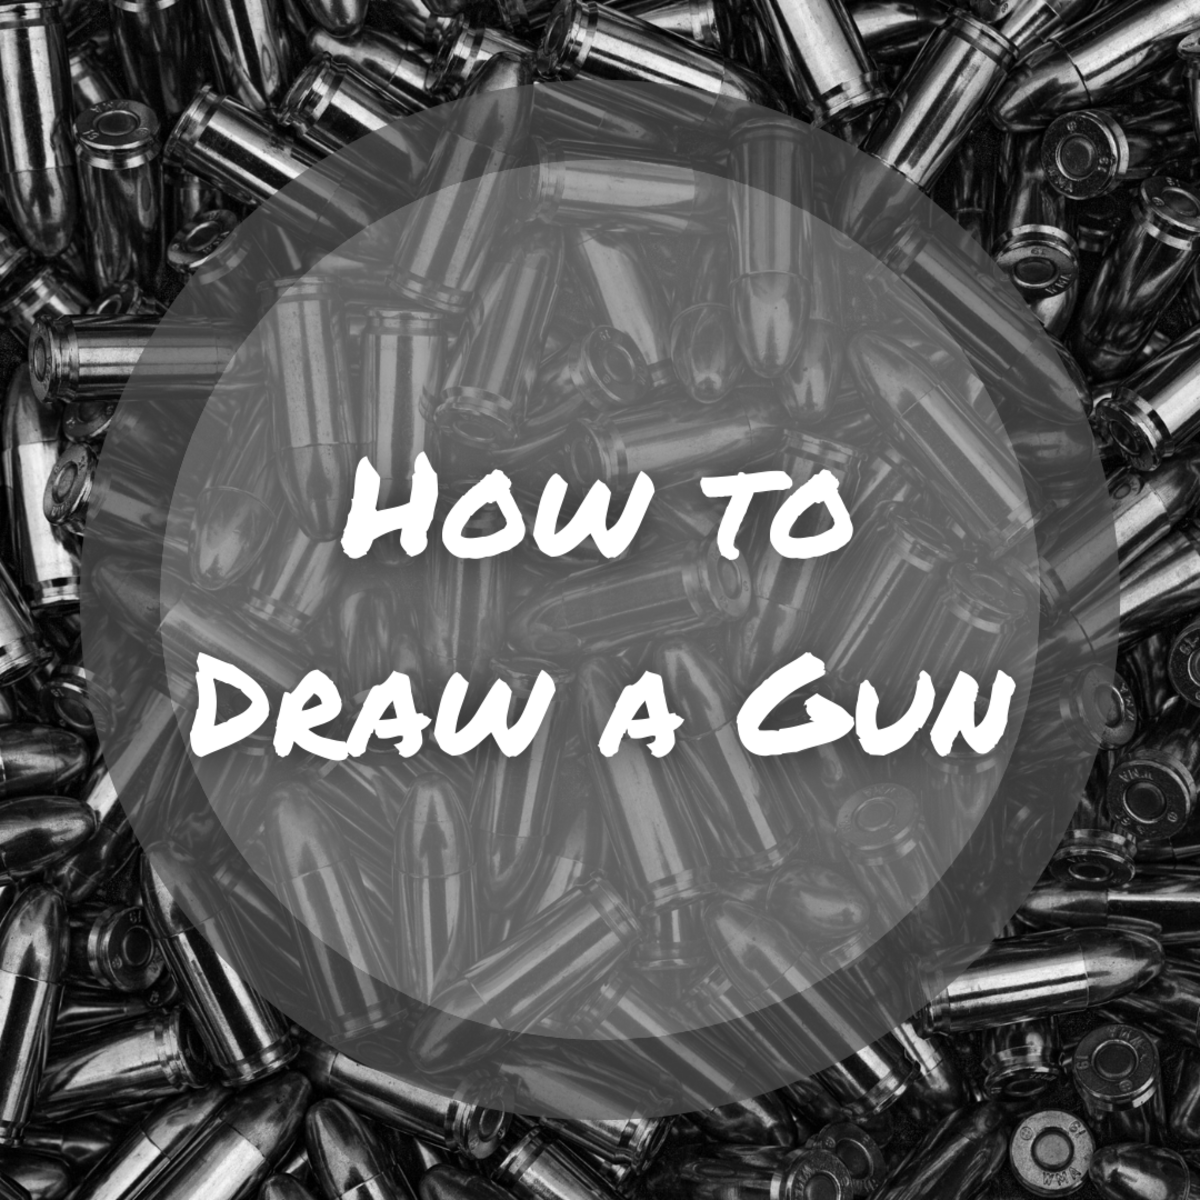 This complete tutorial will teach you how to draw a gun and includes photos and videos